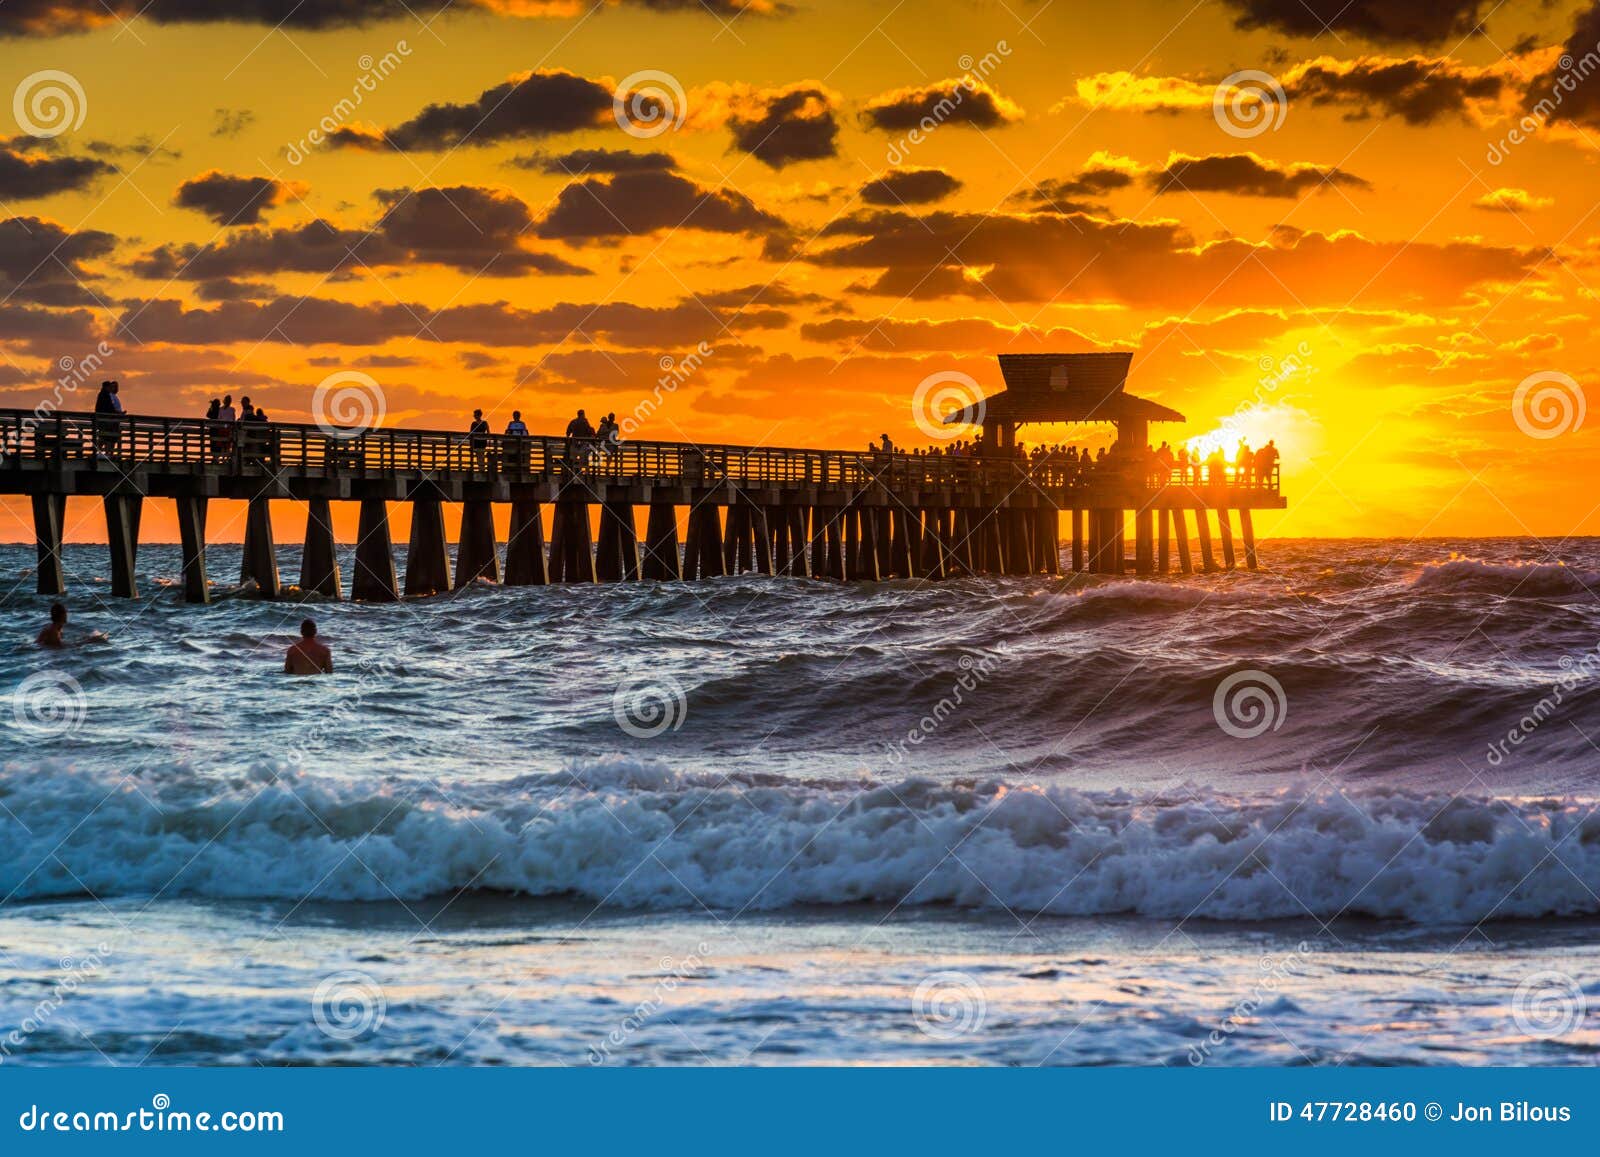 sunset over the fishing pier and gulf of mexico in naples, florida.